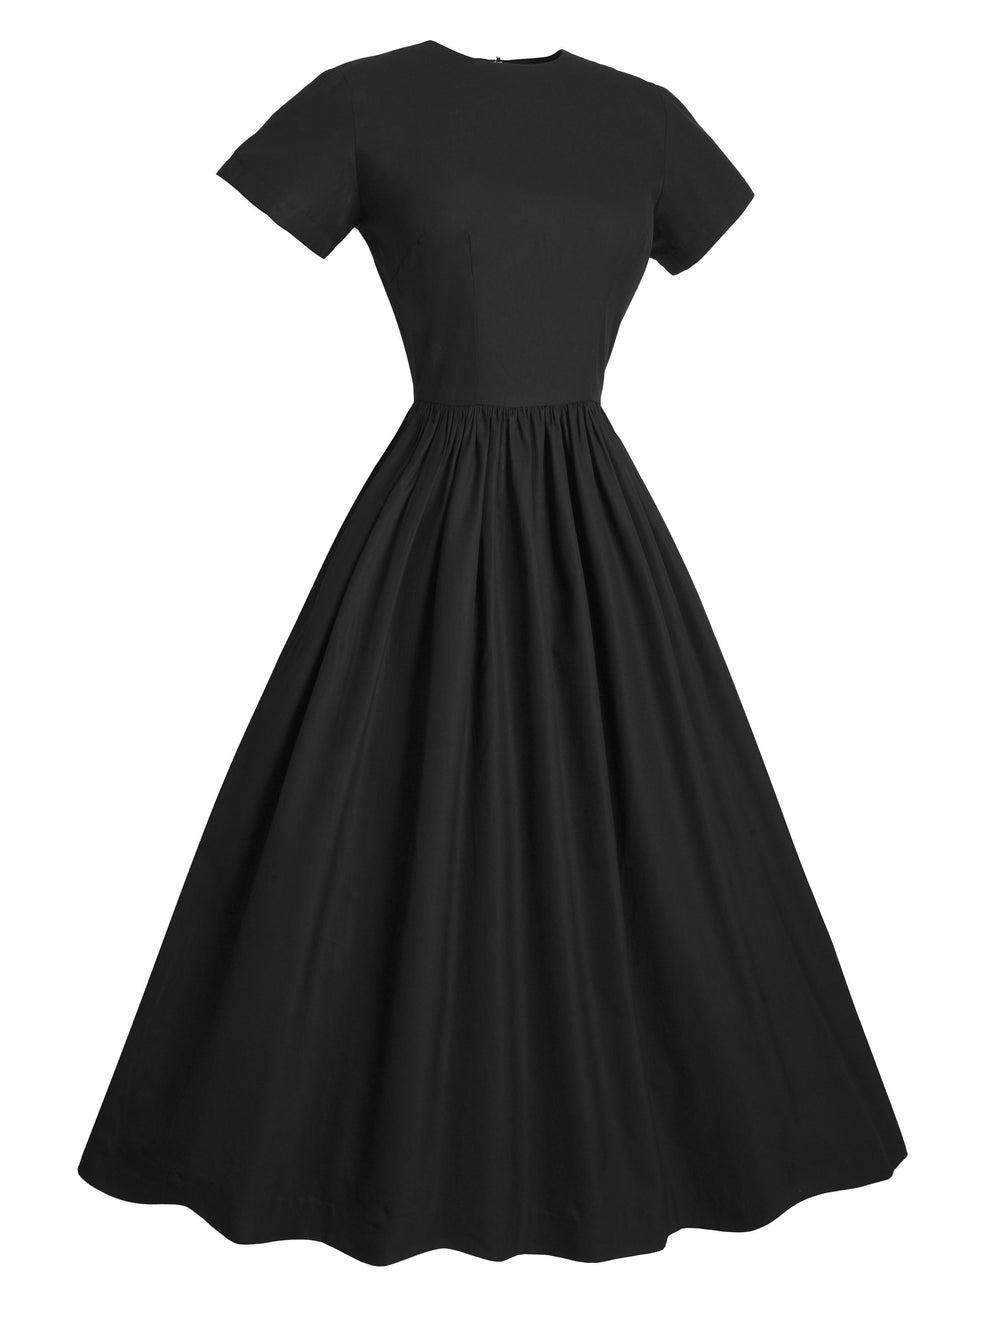 RTS - Size S - Dorothy Dress in Raven Black Cotton